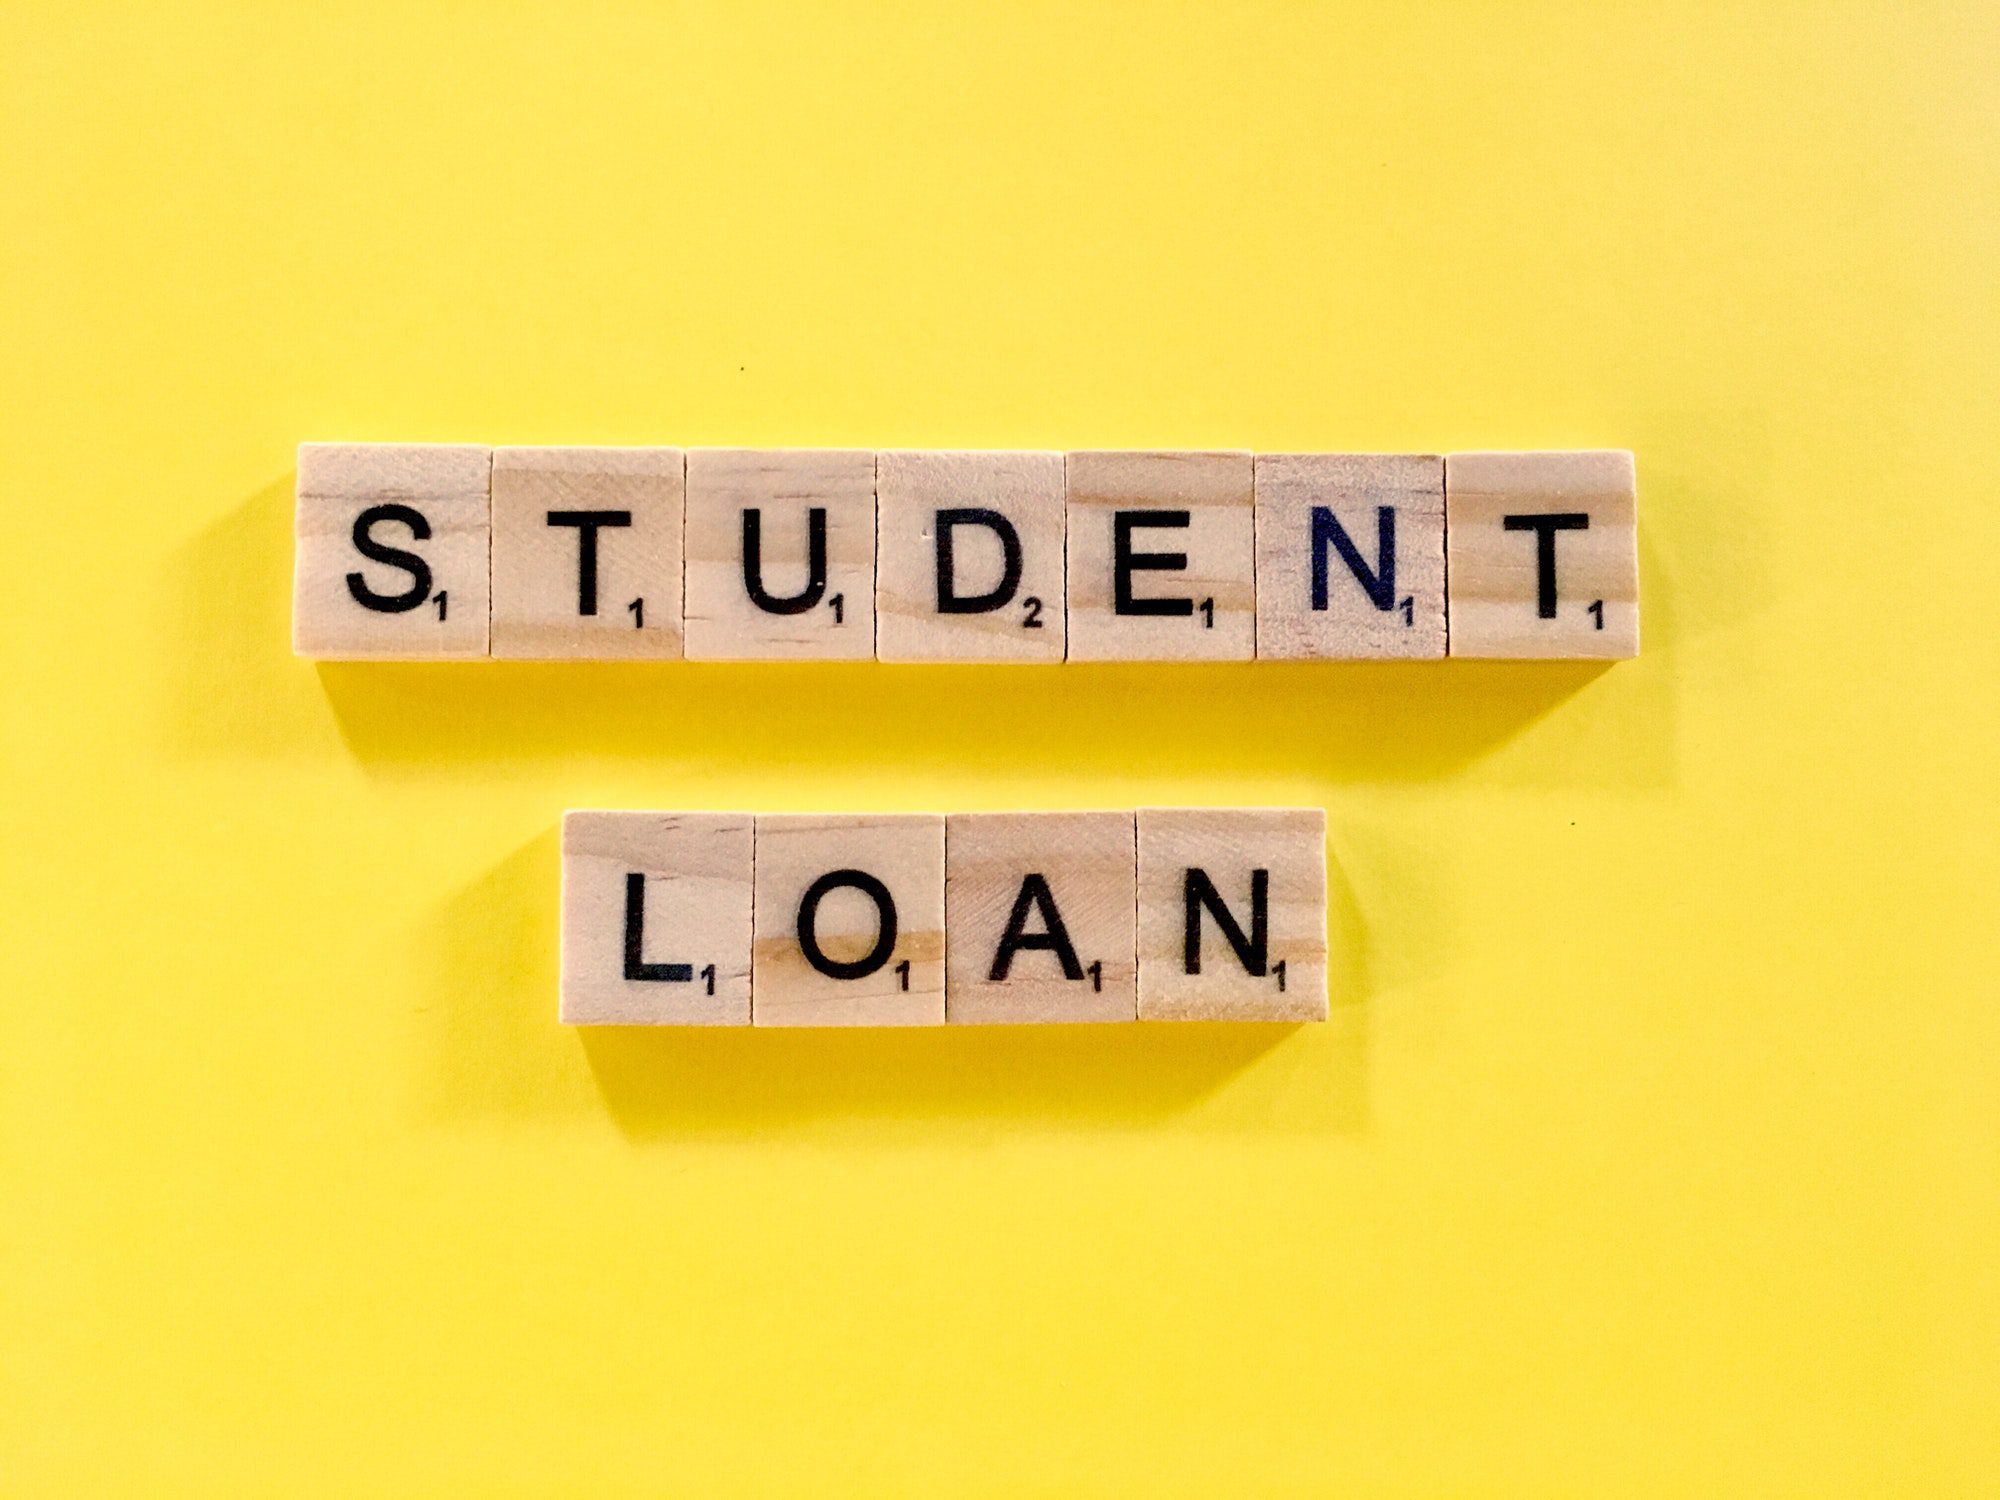 Blocks spelling student loan to show the lighter side of student loan debt for baby boomers.